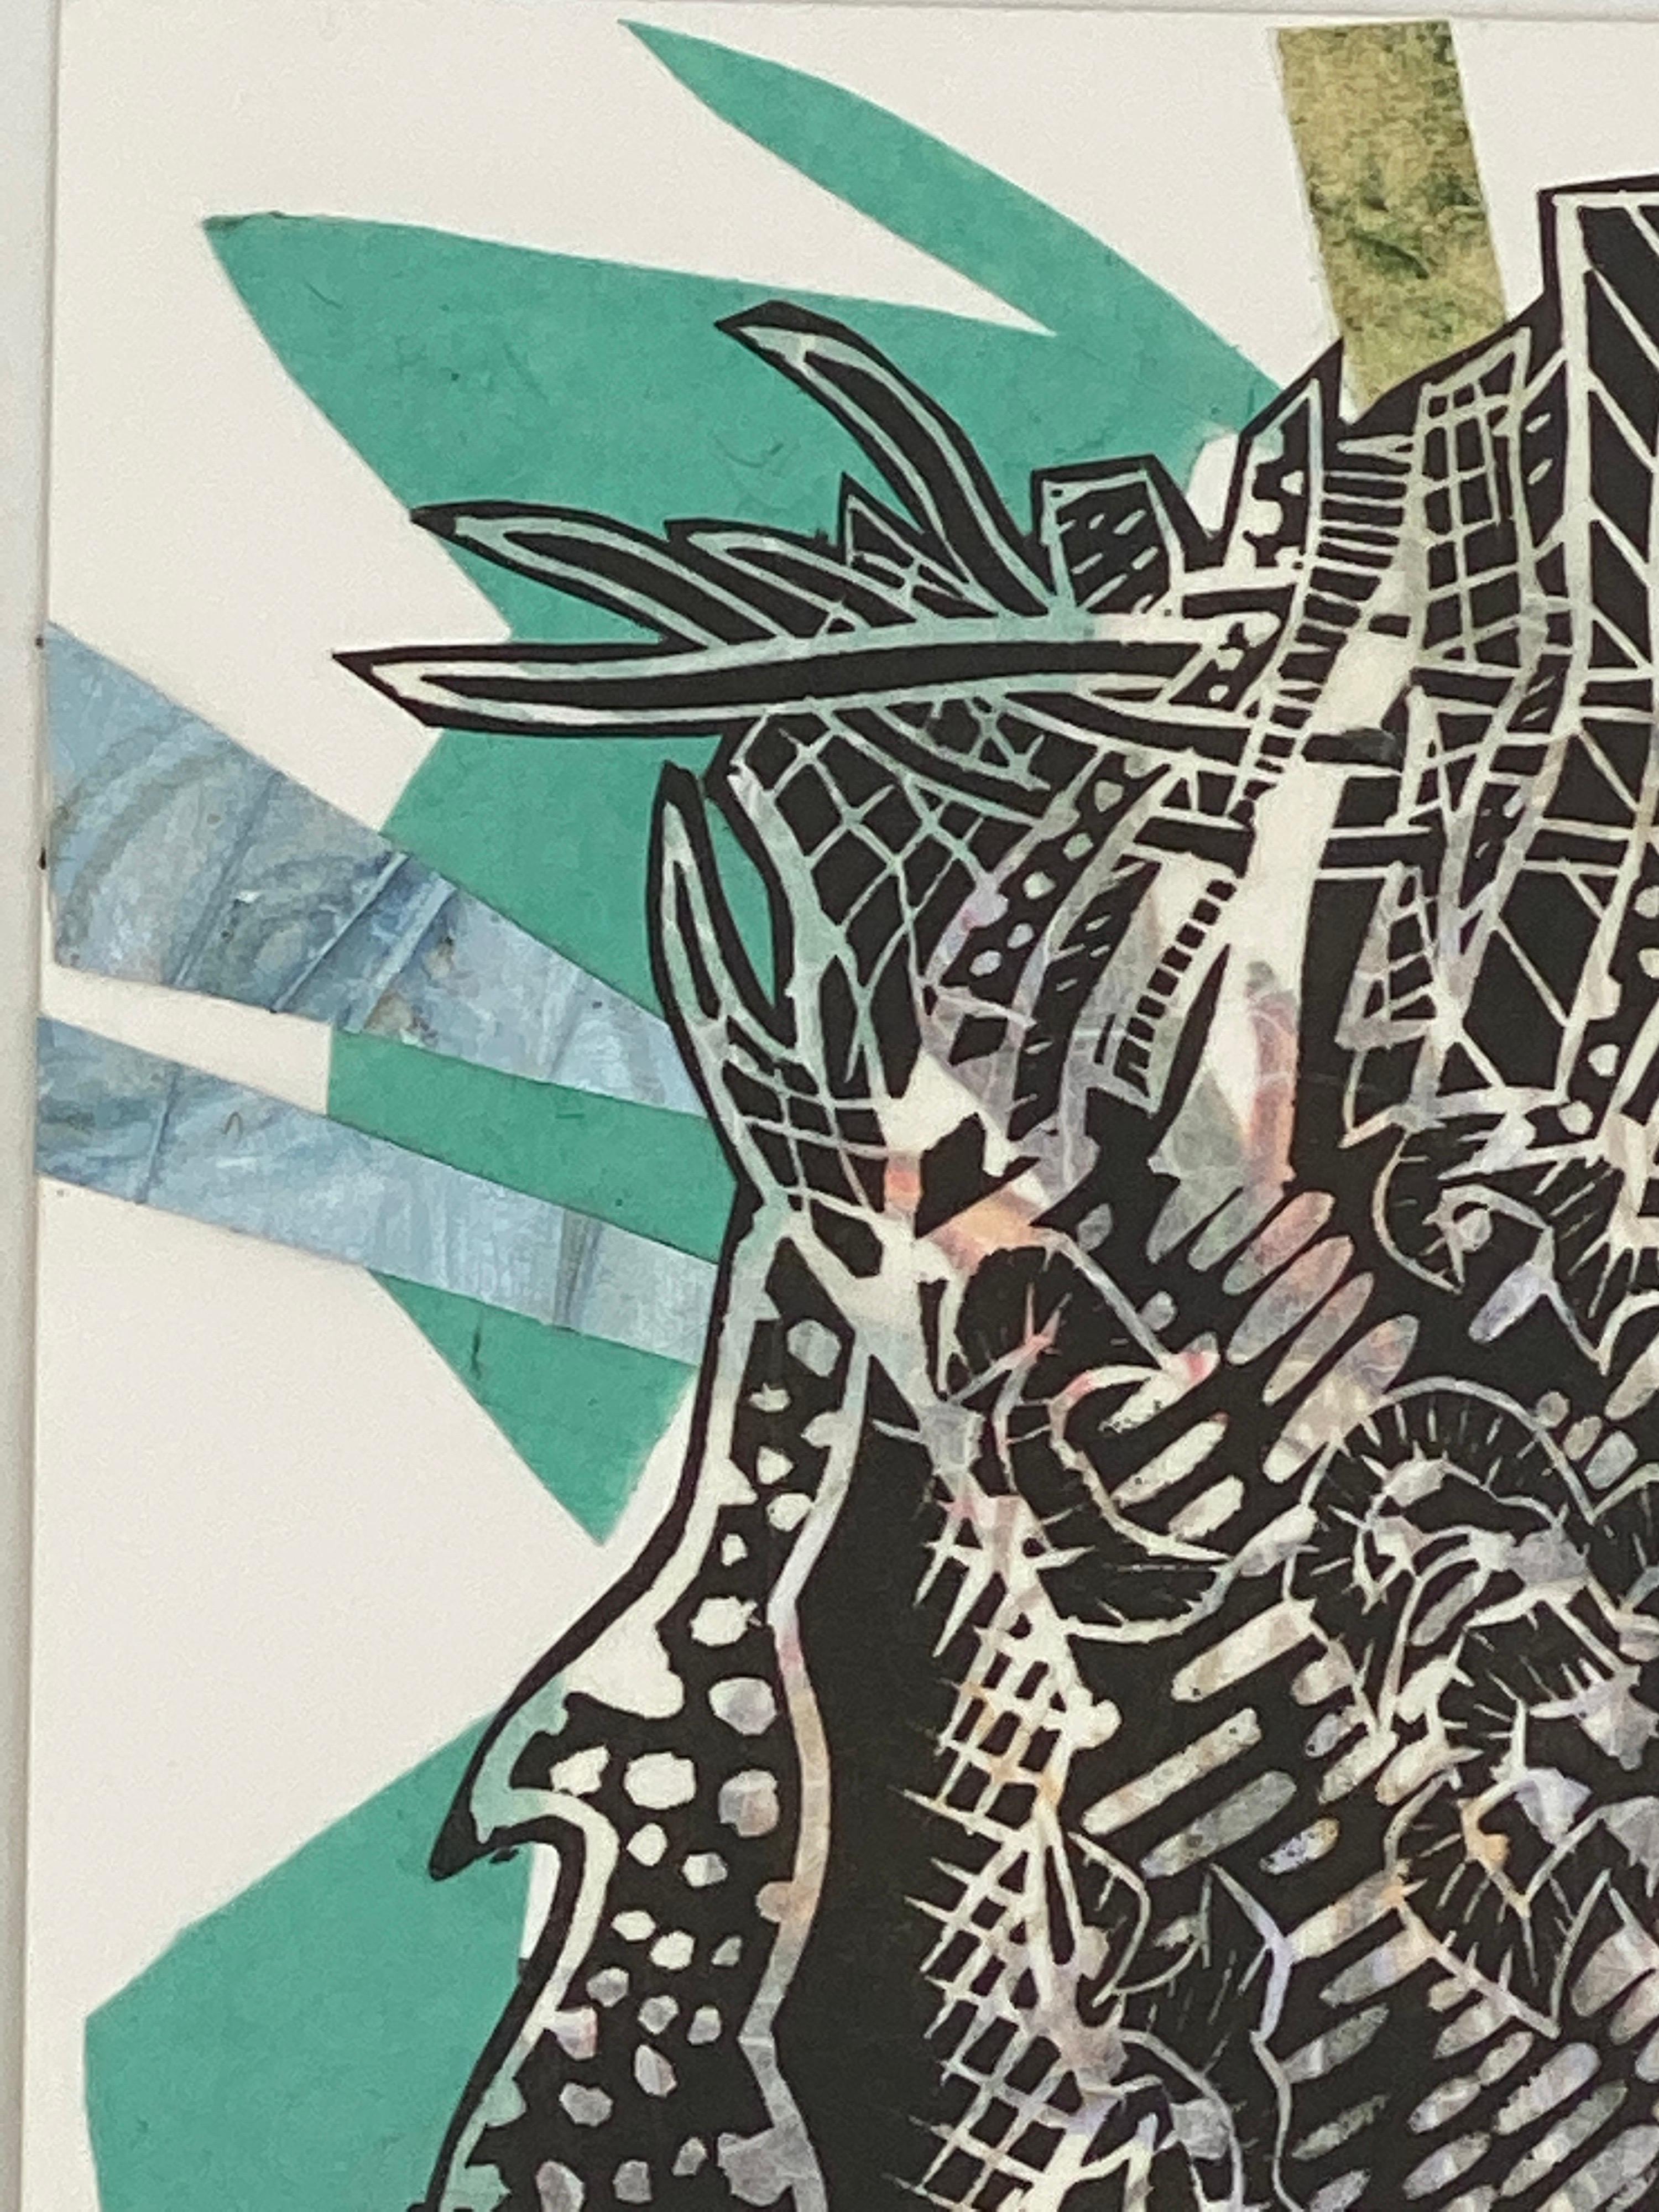 Hand cut and collaged linocut monotype and collagraph prints create this teal black and white abstract botanical original. The form in the work is created from a drawing of one of the artist's organic shaped sculptures. Created while a part of the